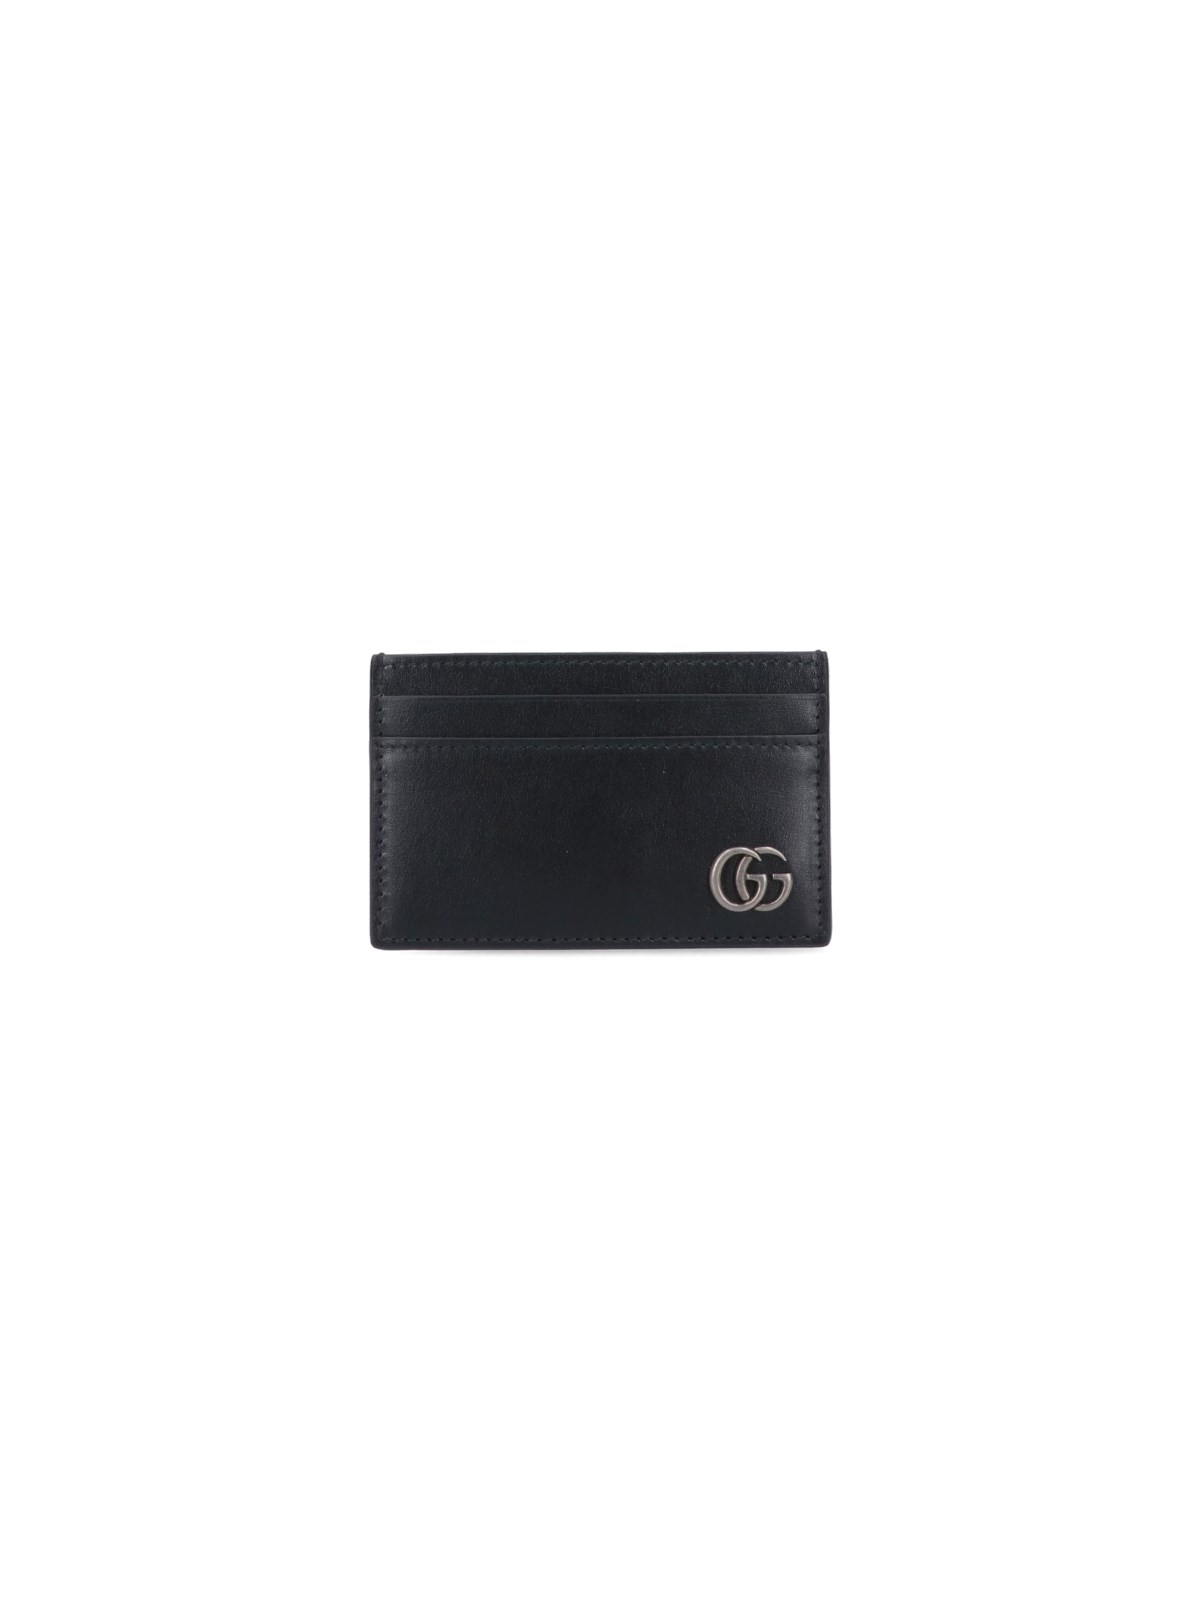 GUCCI CARD HOLDER 'GG MARMONT'